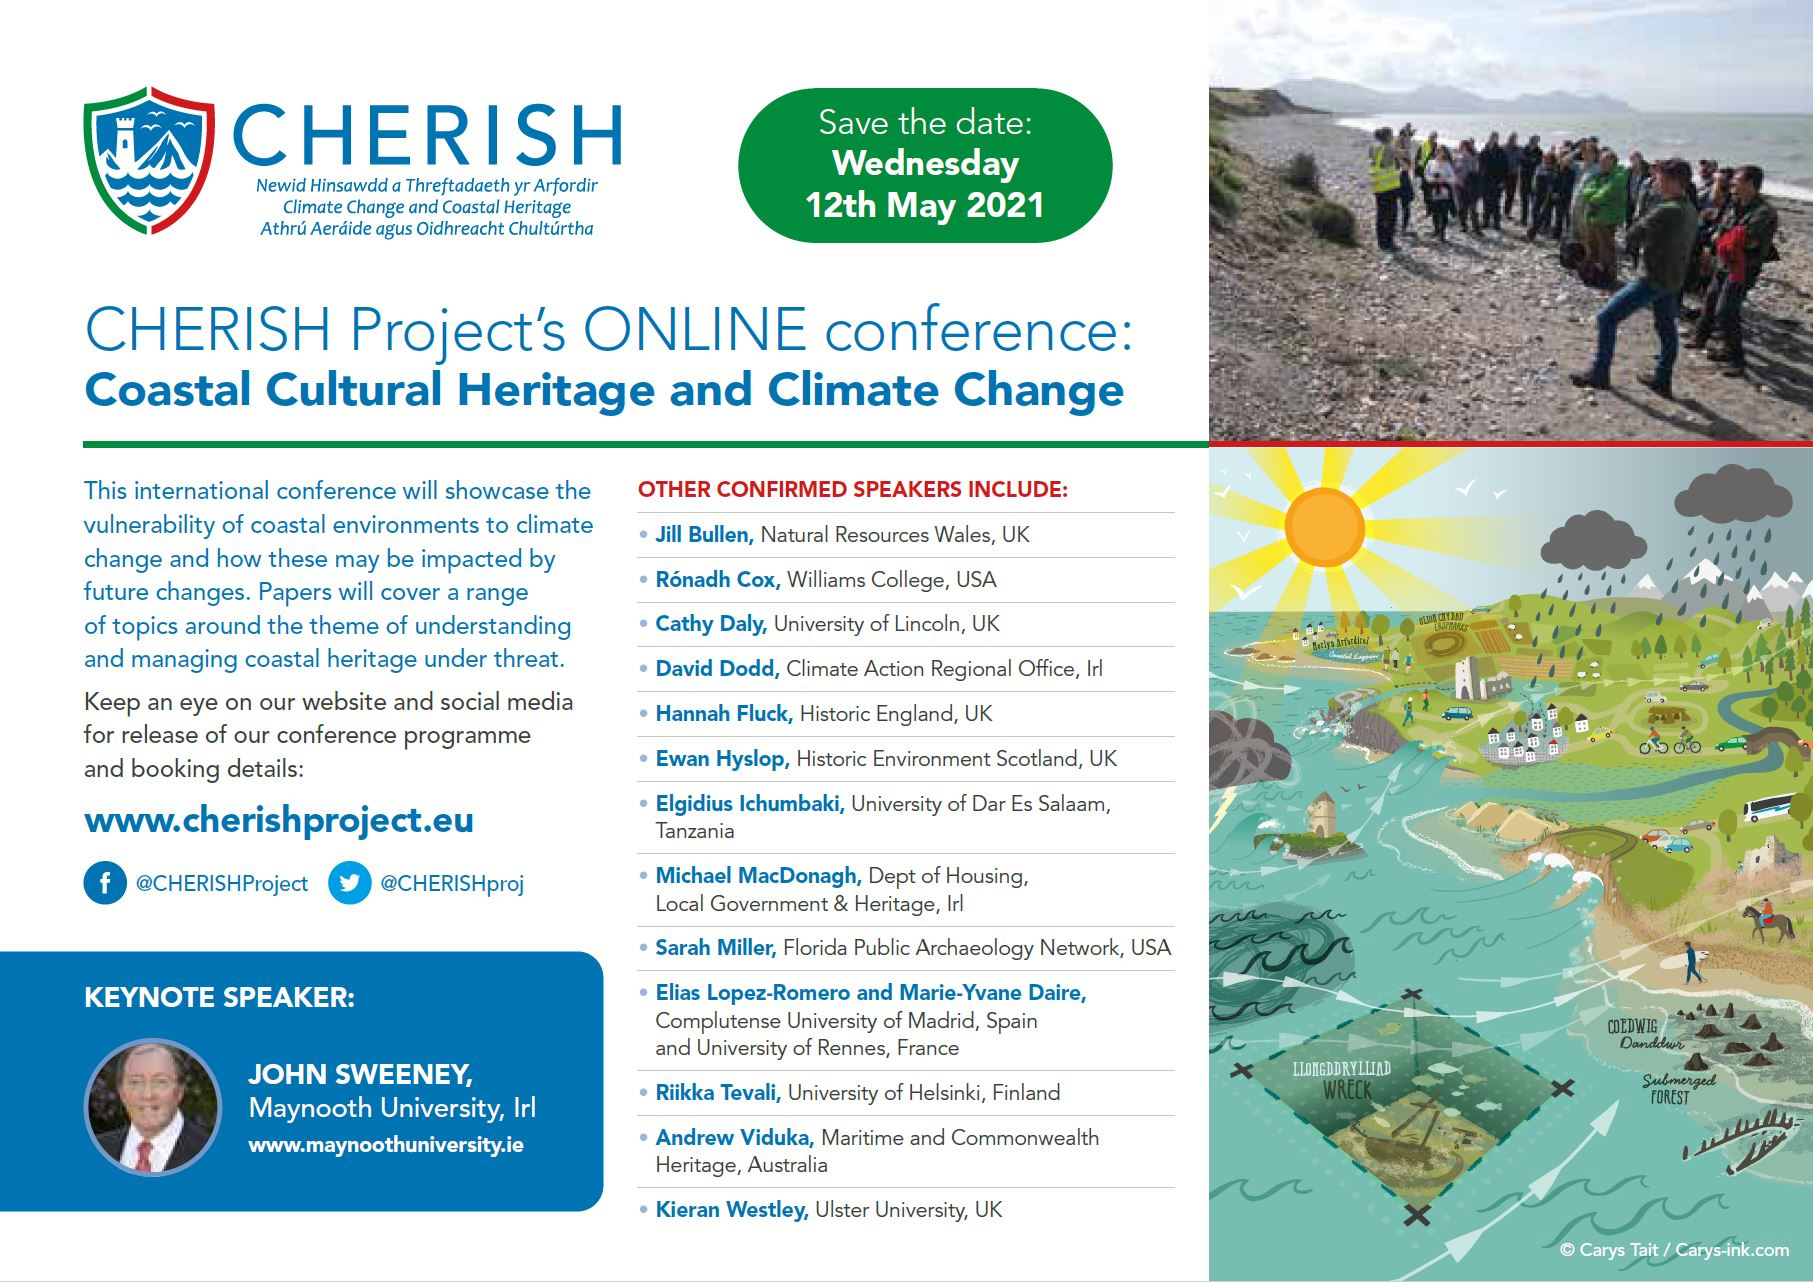 CHERISH Project’s Online Conference: Coastal Cultural Heritage and Climate Change